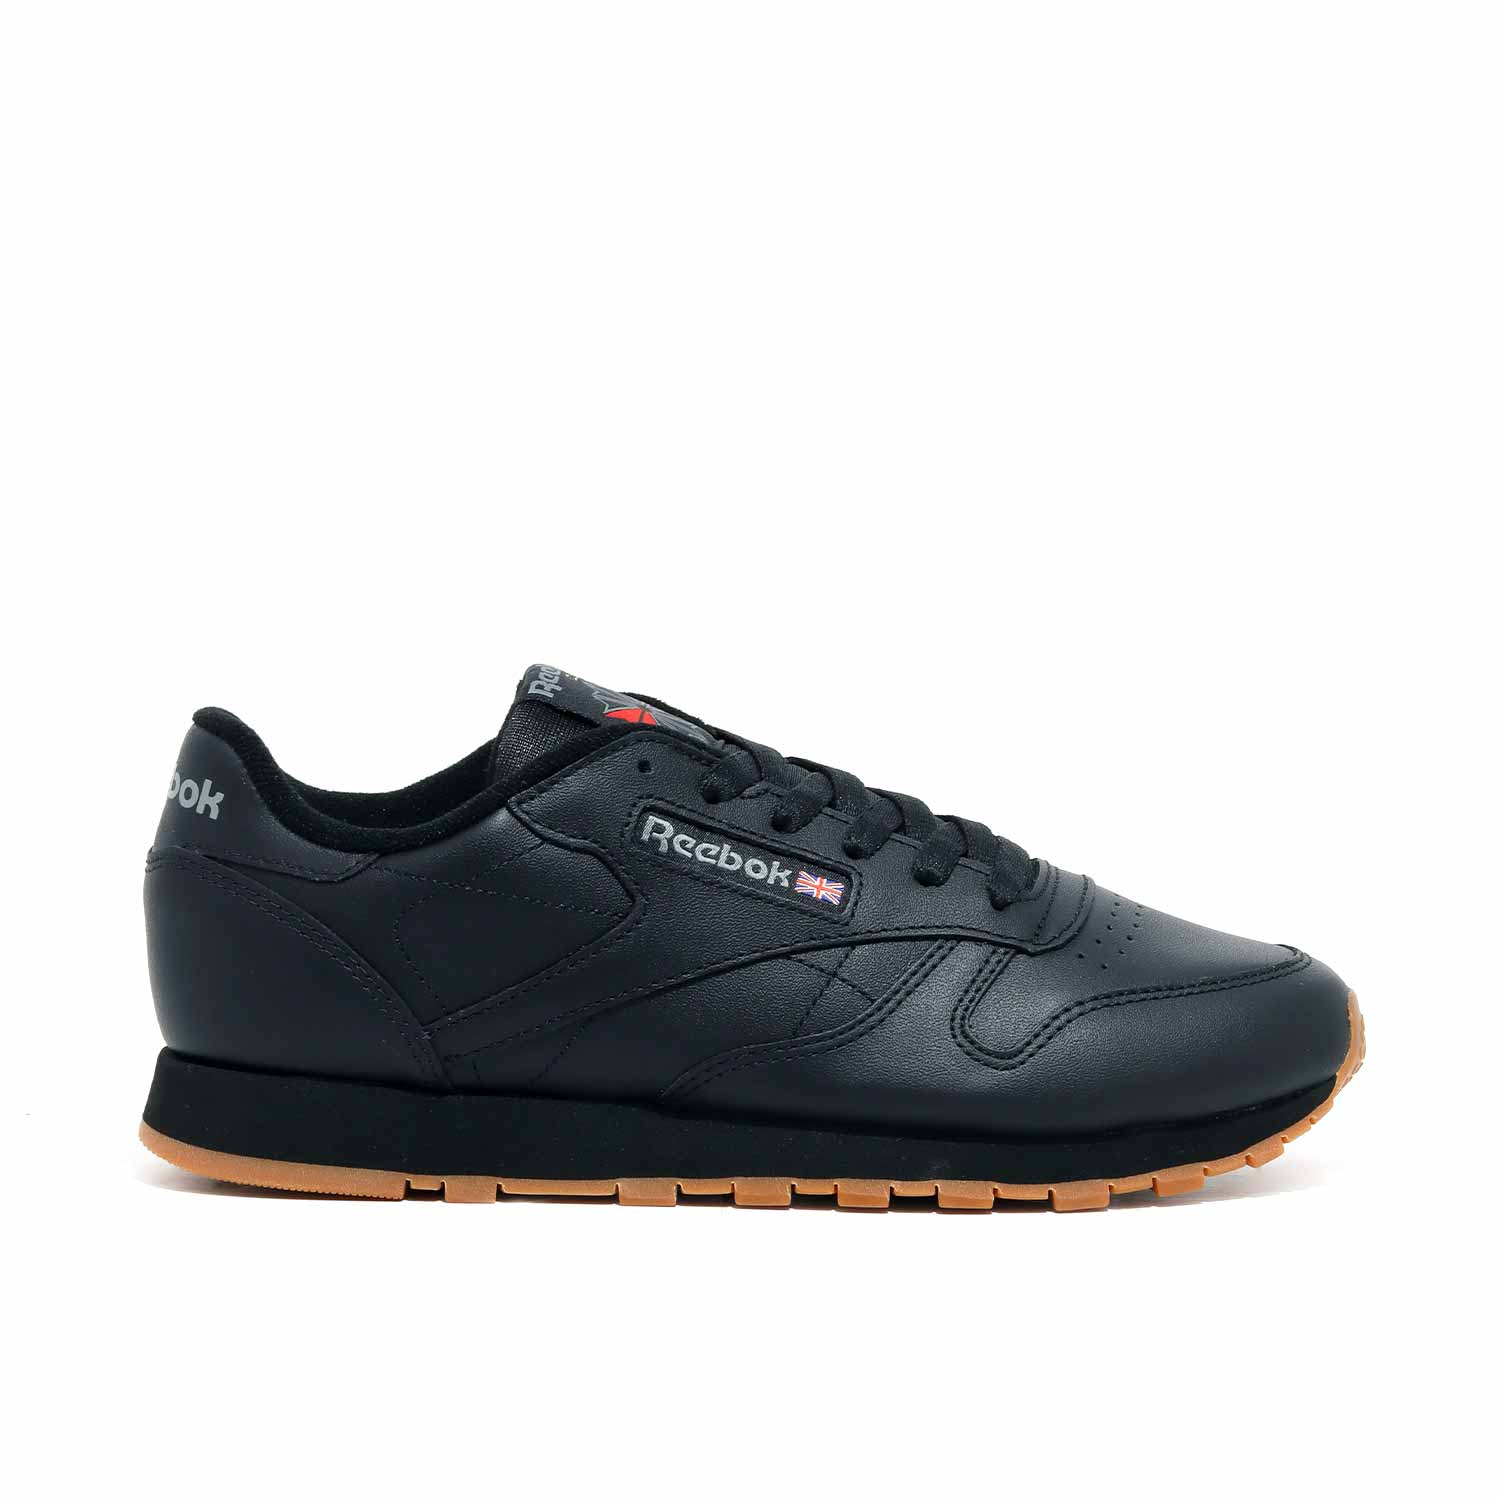 Tenis CL Mujer Casual Negro